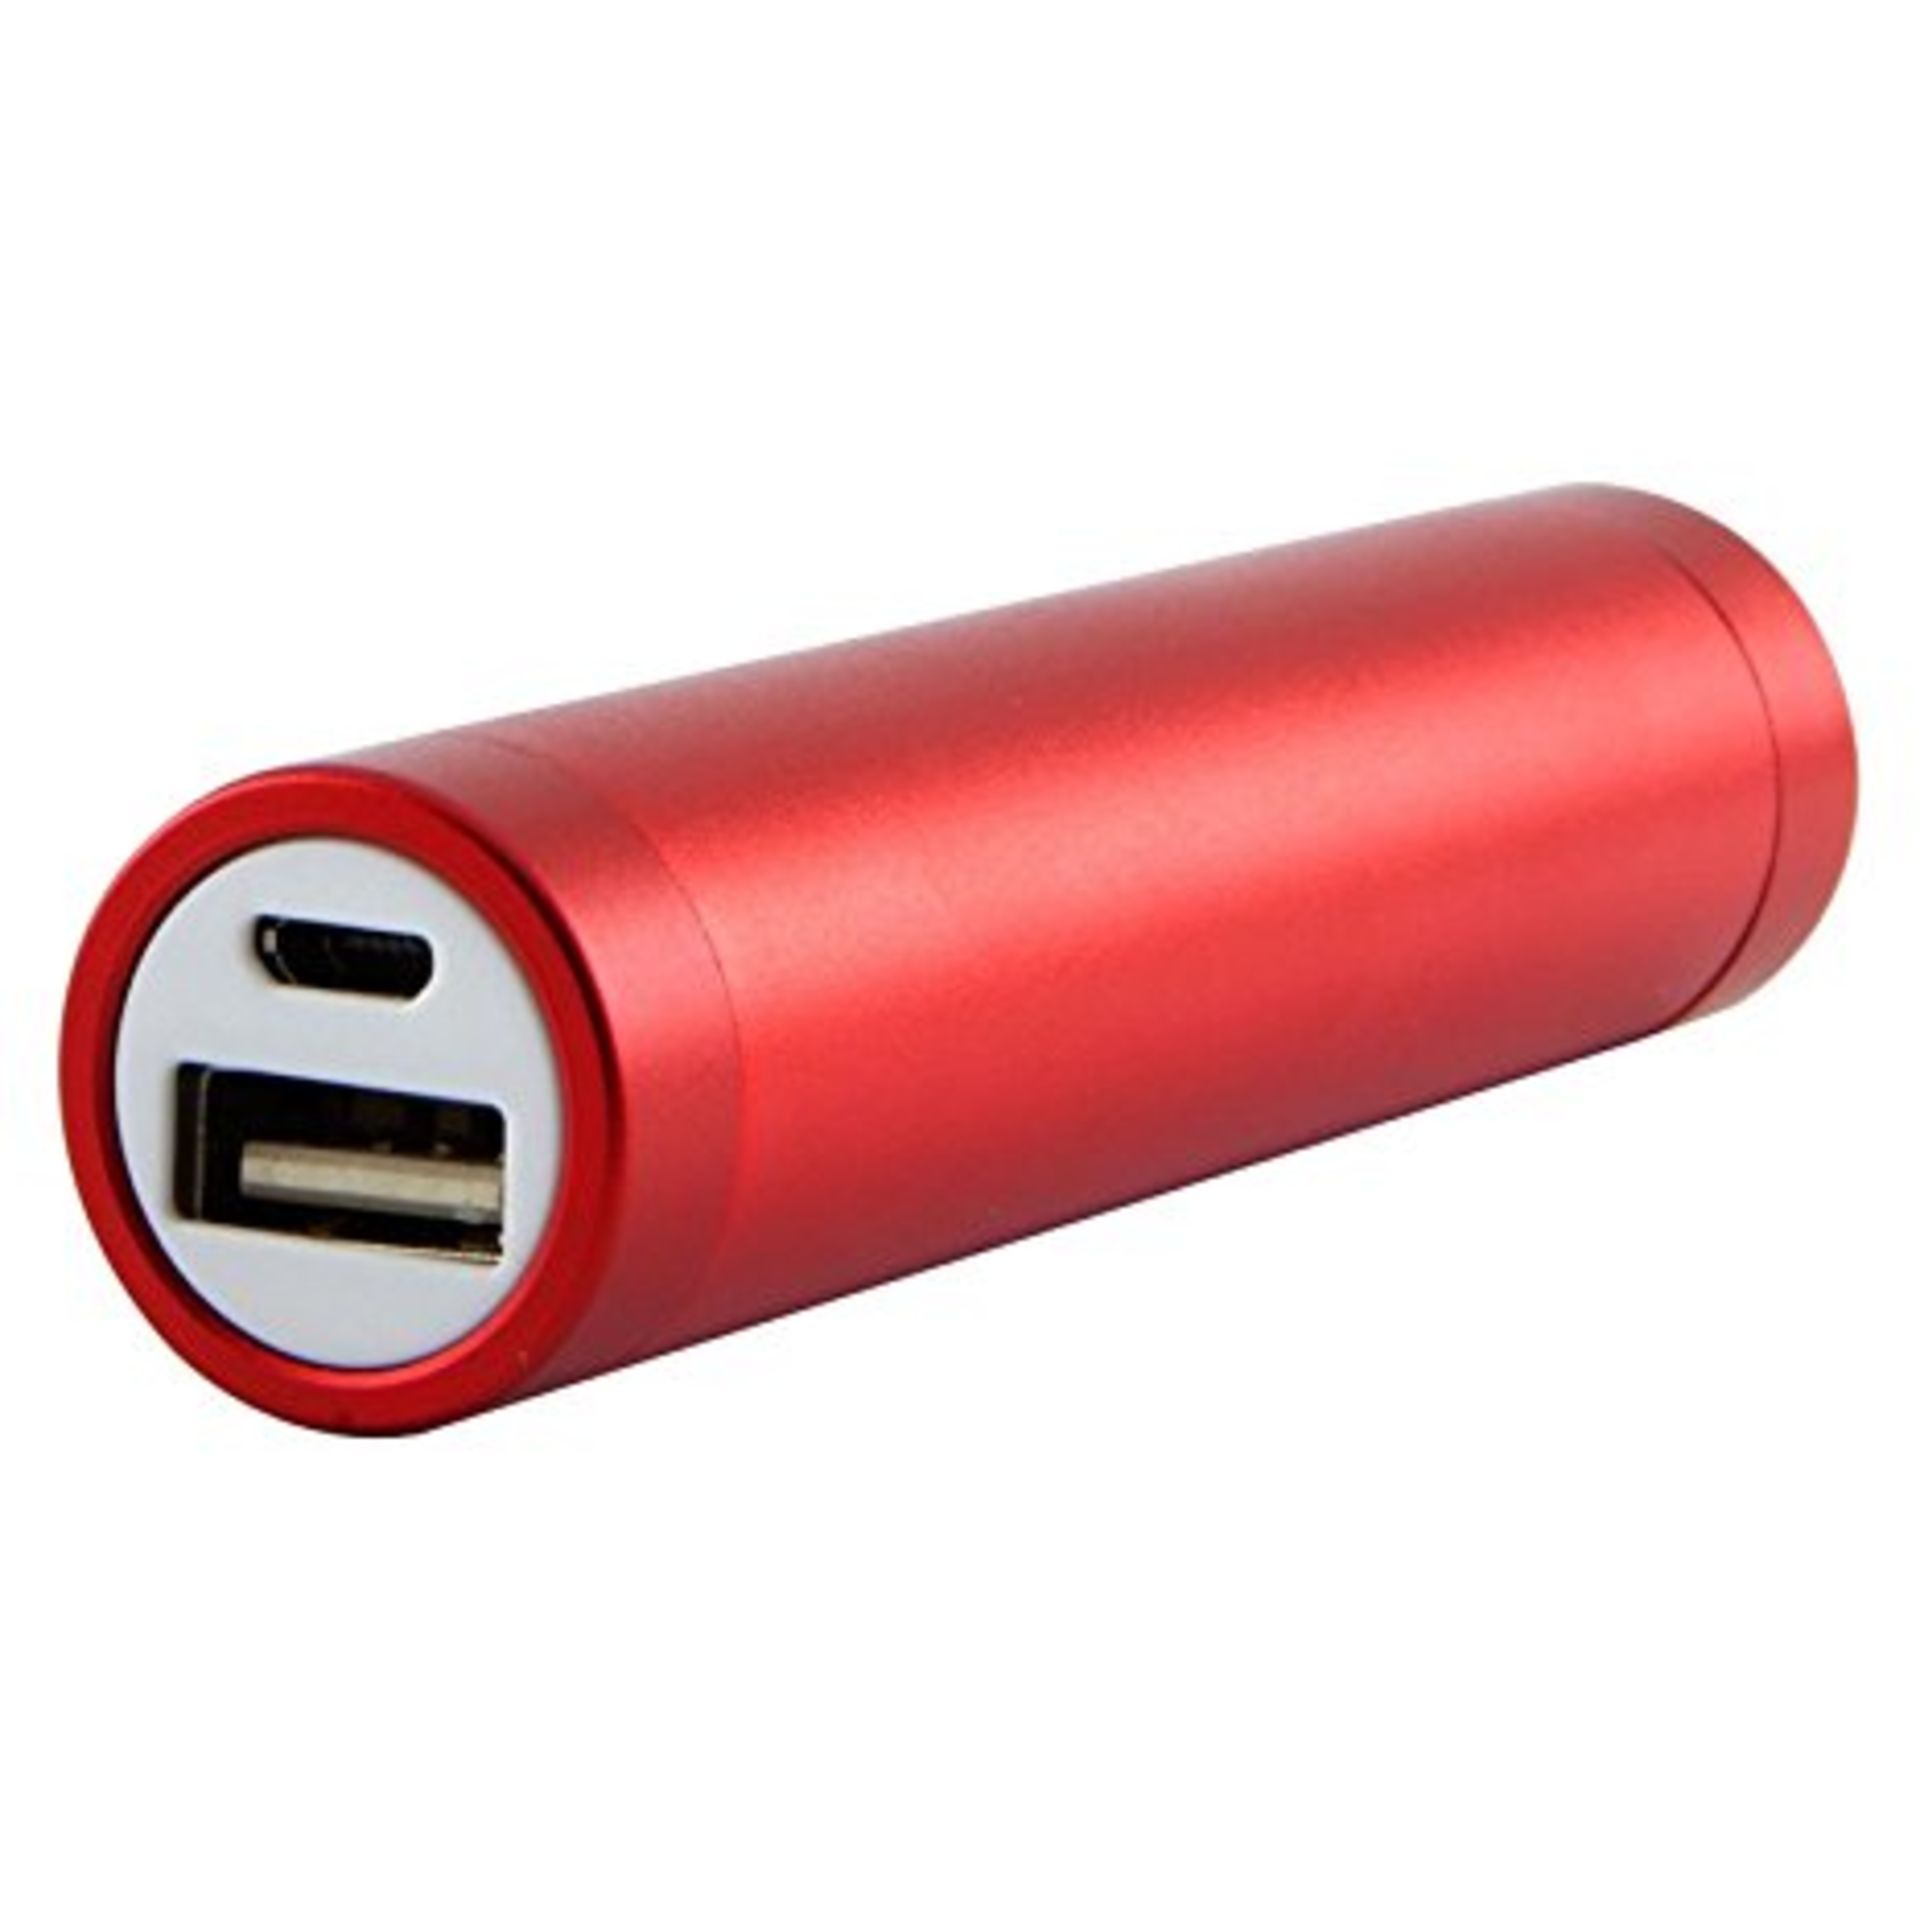 V Brand New On The Move Portable 2200mAh Power Cell Rechargeable Power Bank - Incldues Micro USB